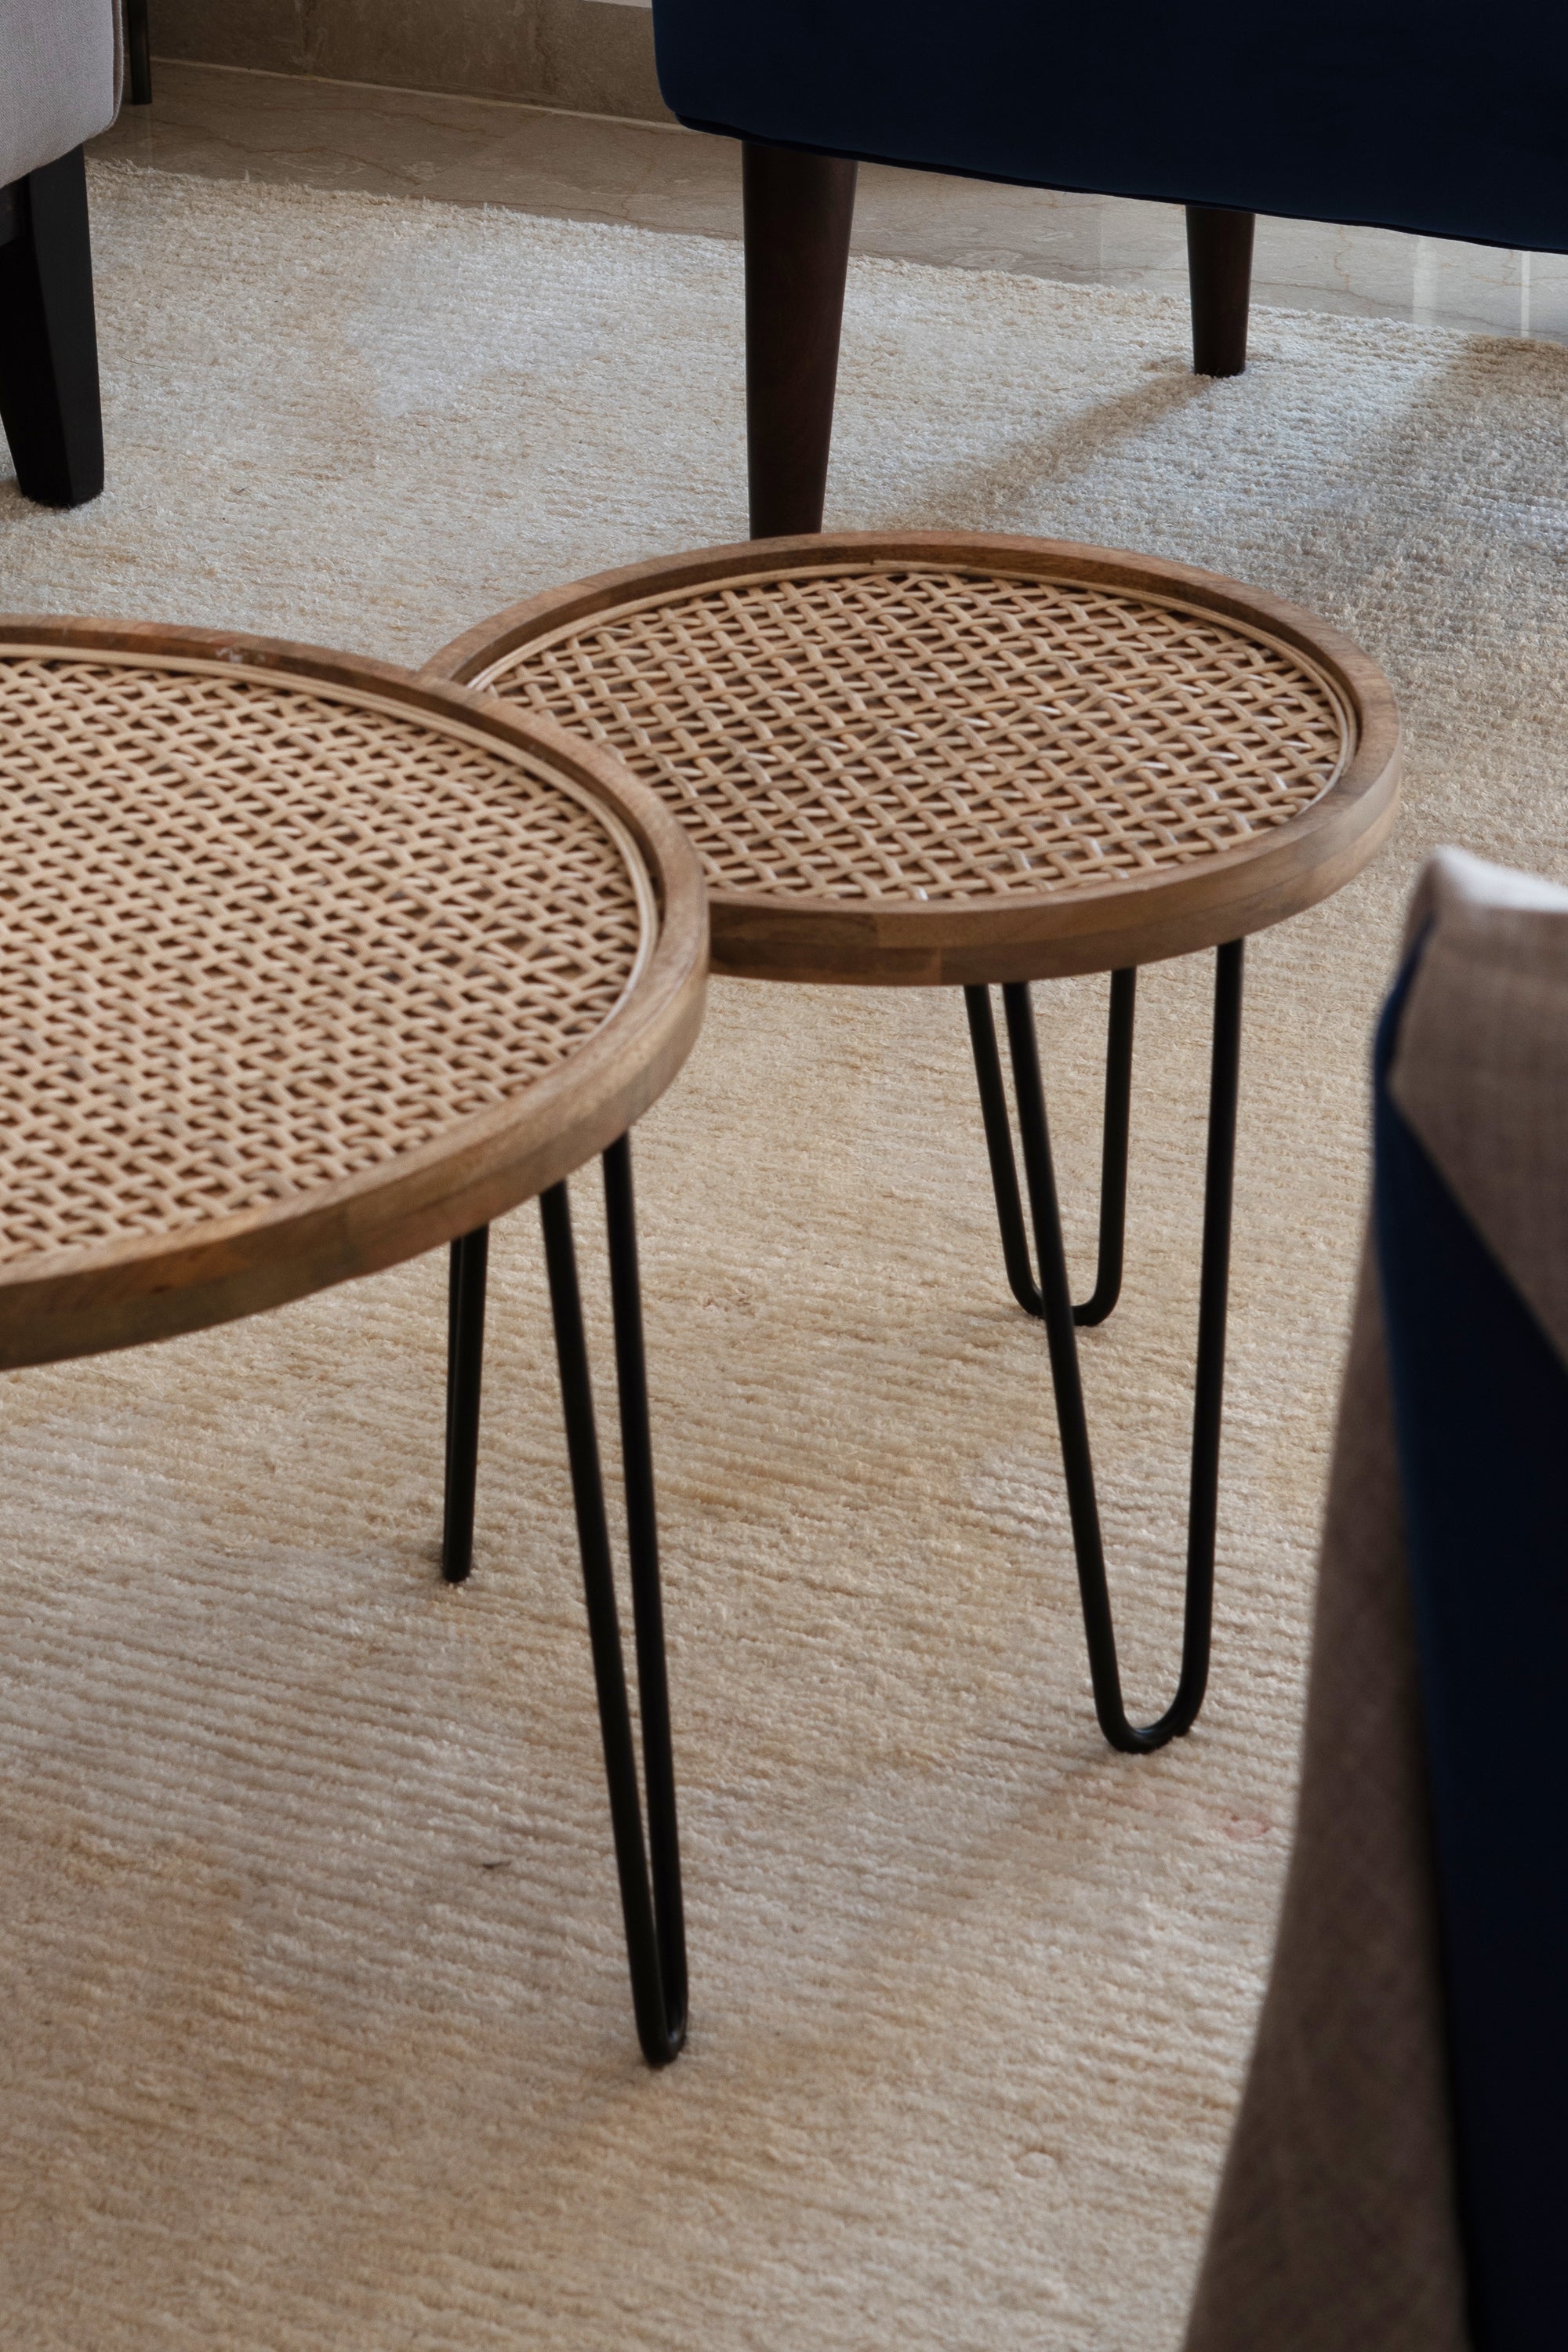 Set of 2 nesting tables with Rattan work